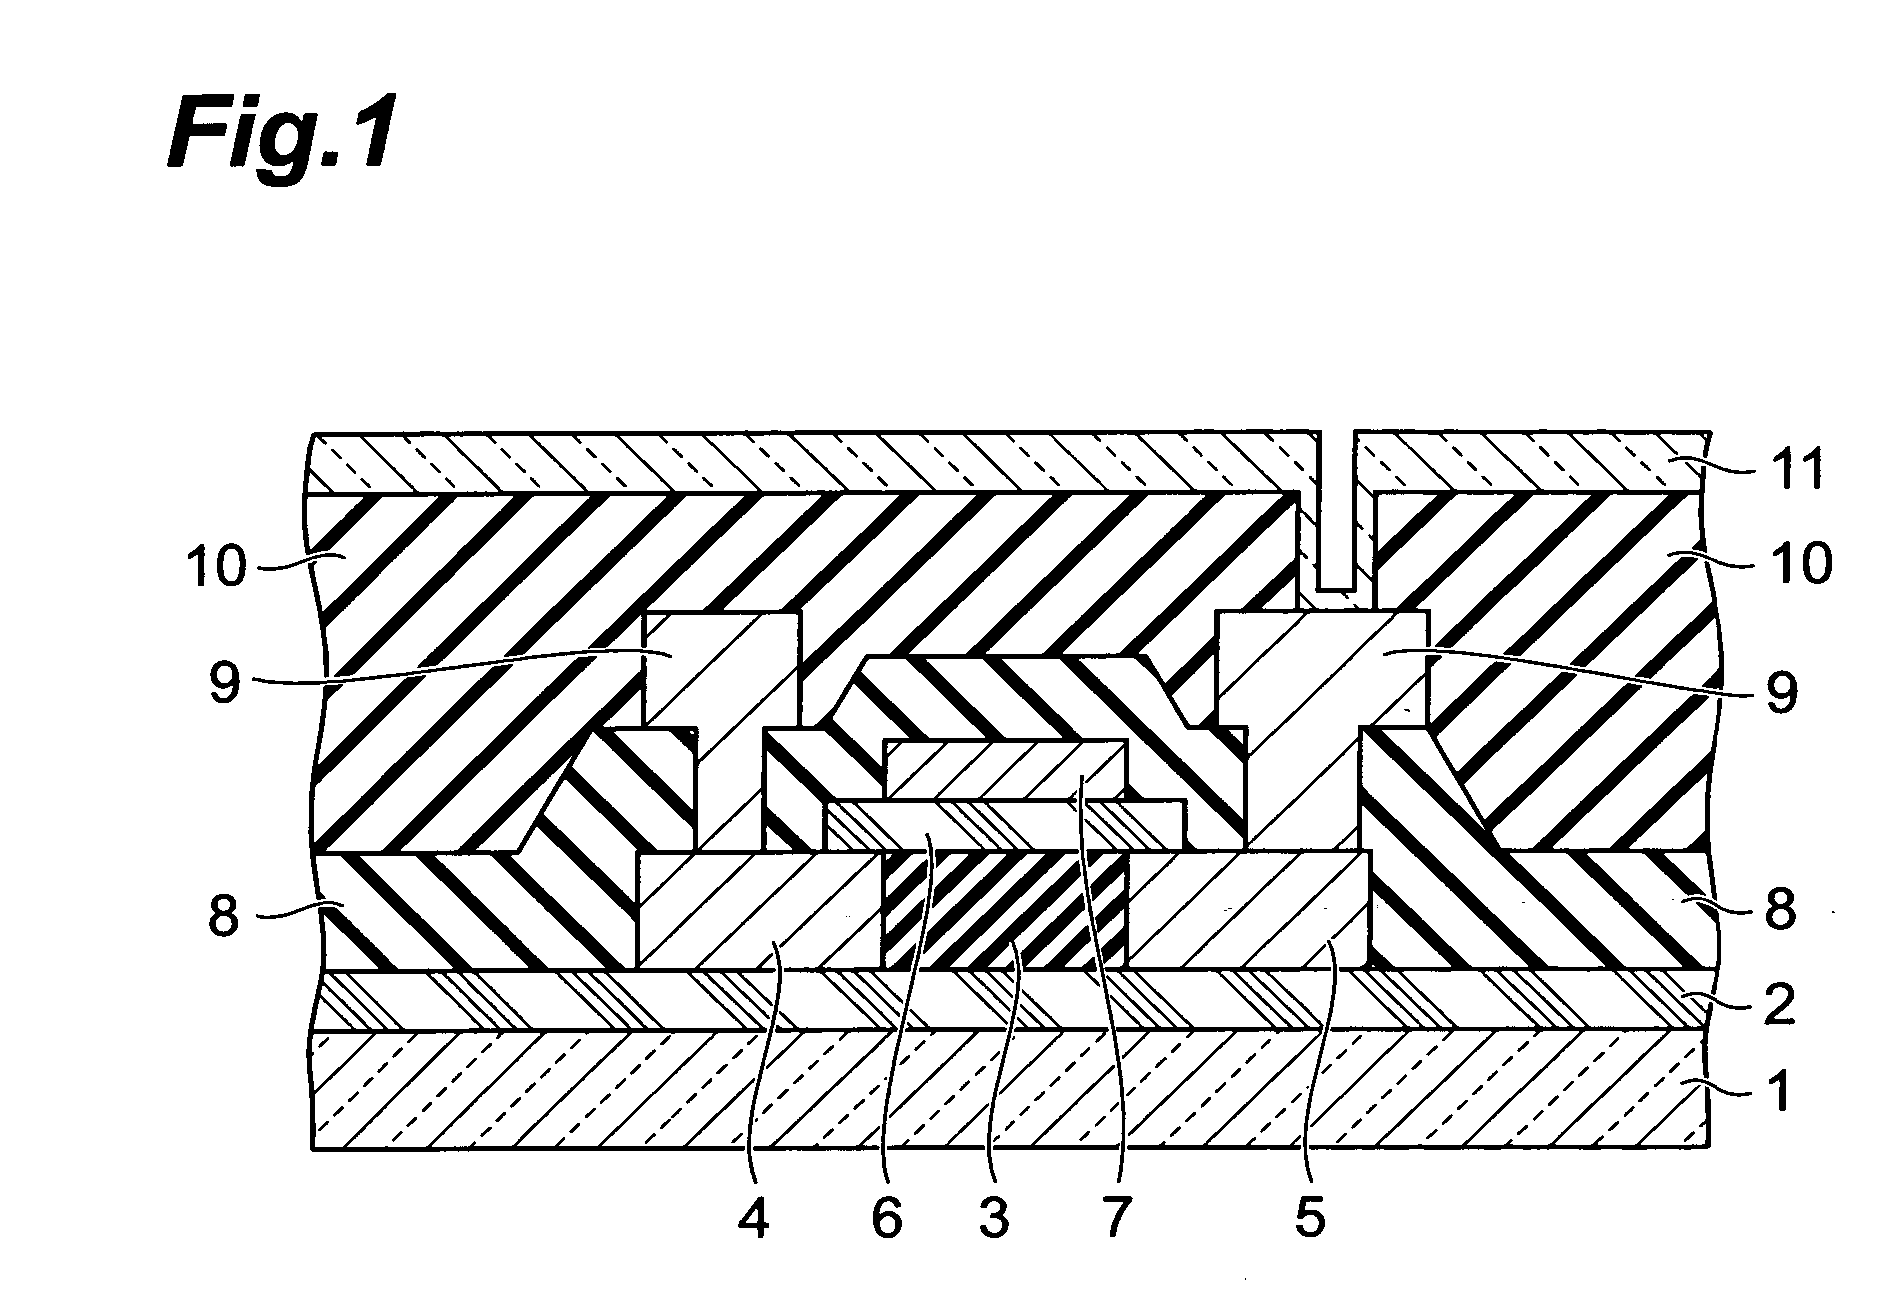 Radiation curable composition, storing method thereof, forming method of cured film, patterning method, use of pattern, electronic components and optical waveguide